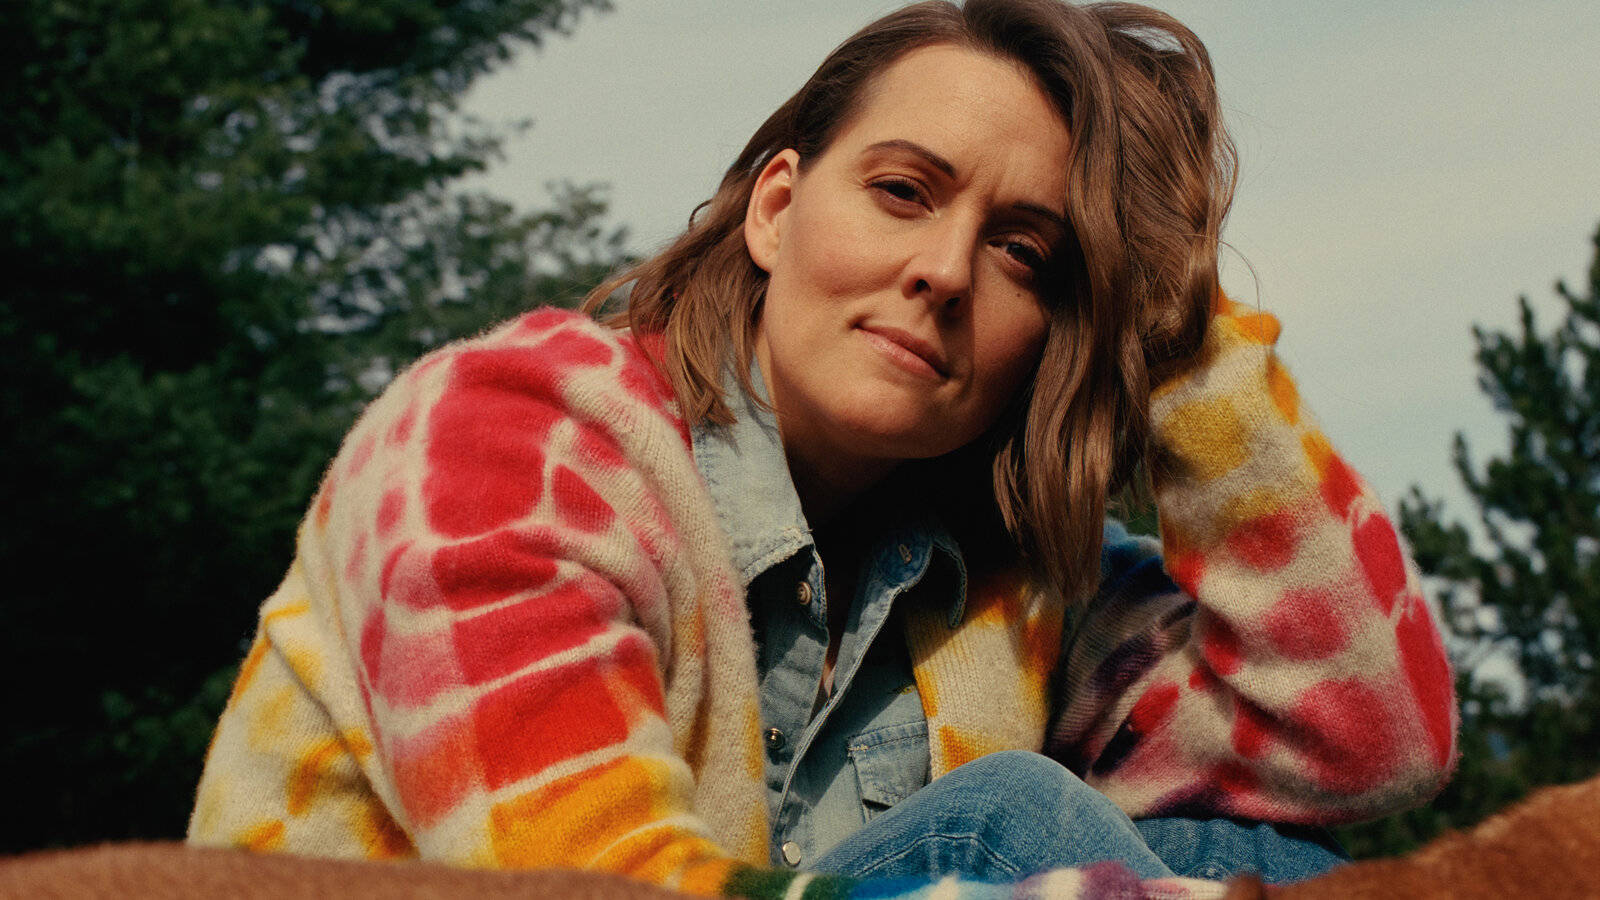 Brandi Carlile Looking Captivating In A Tie-dyed Shirt Background